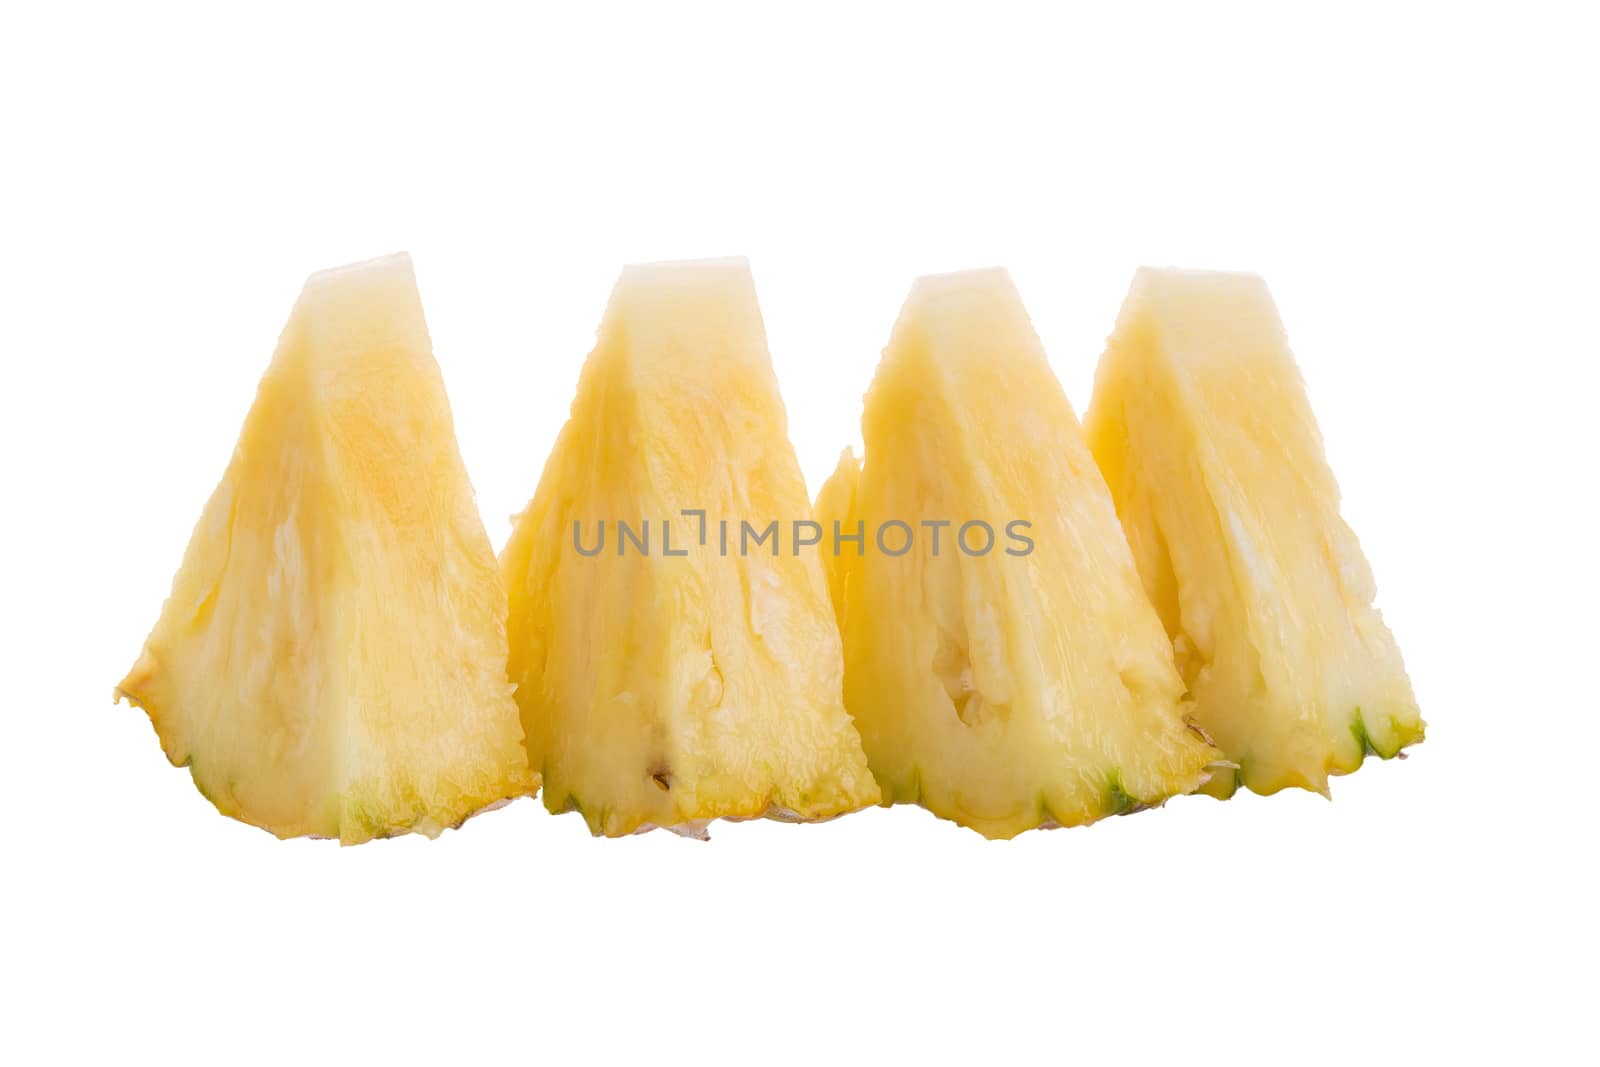 Pineapple slices isolated on a white background by kaiskynet